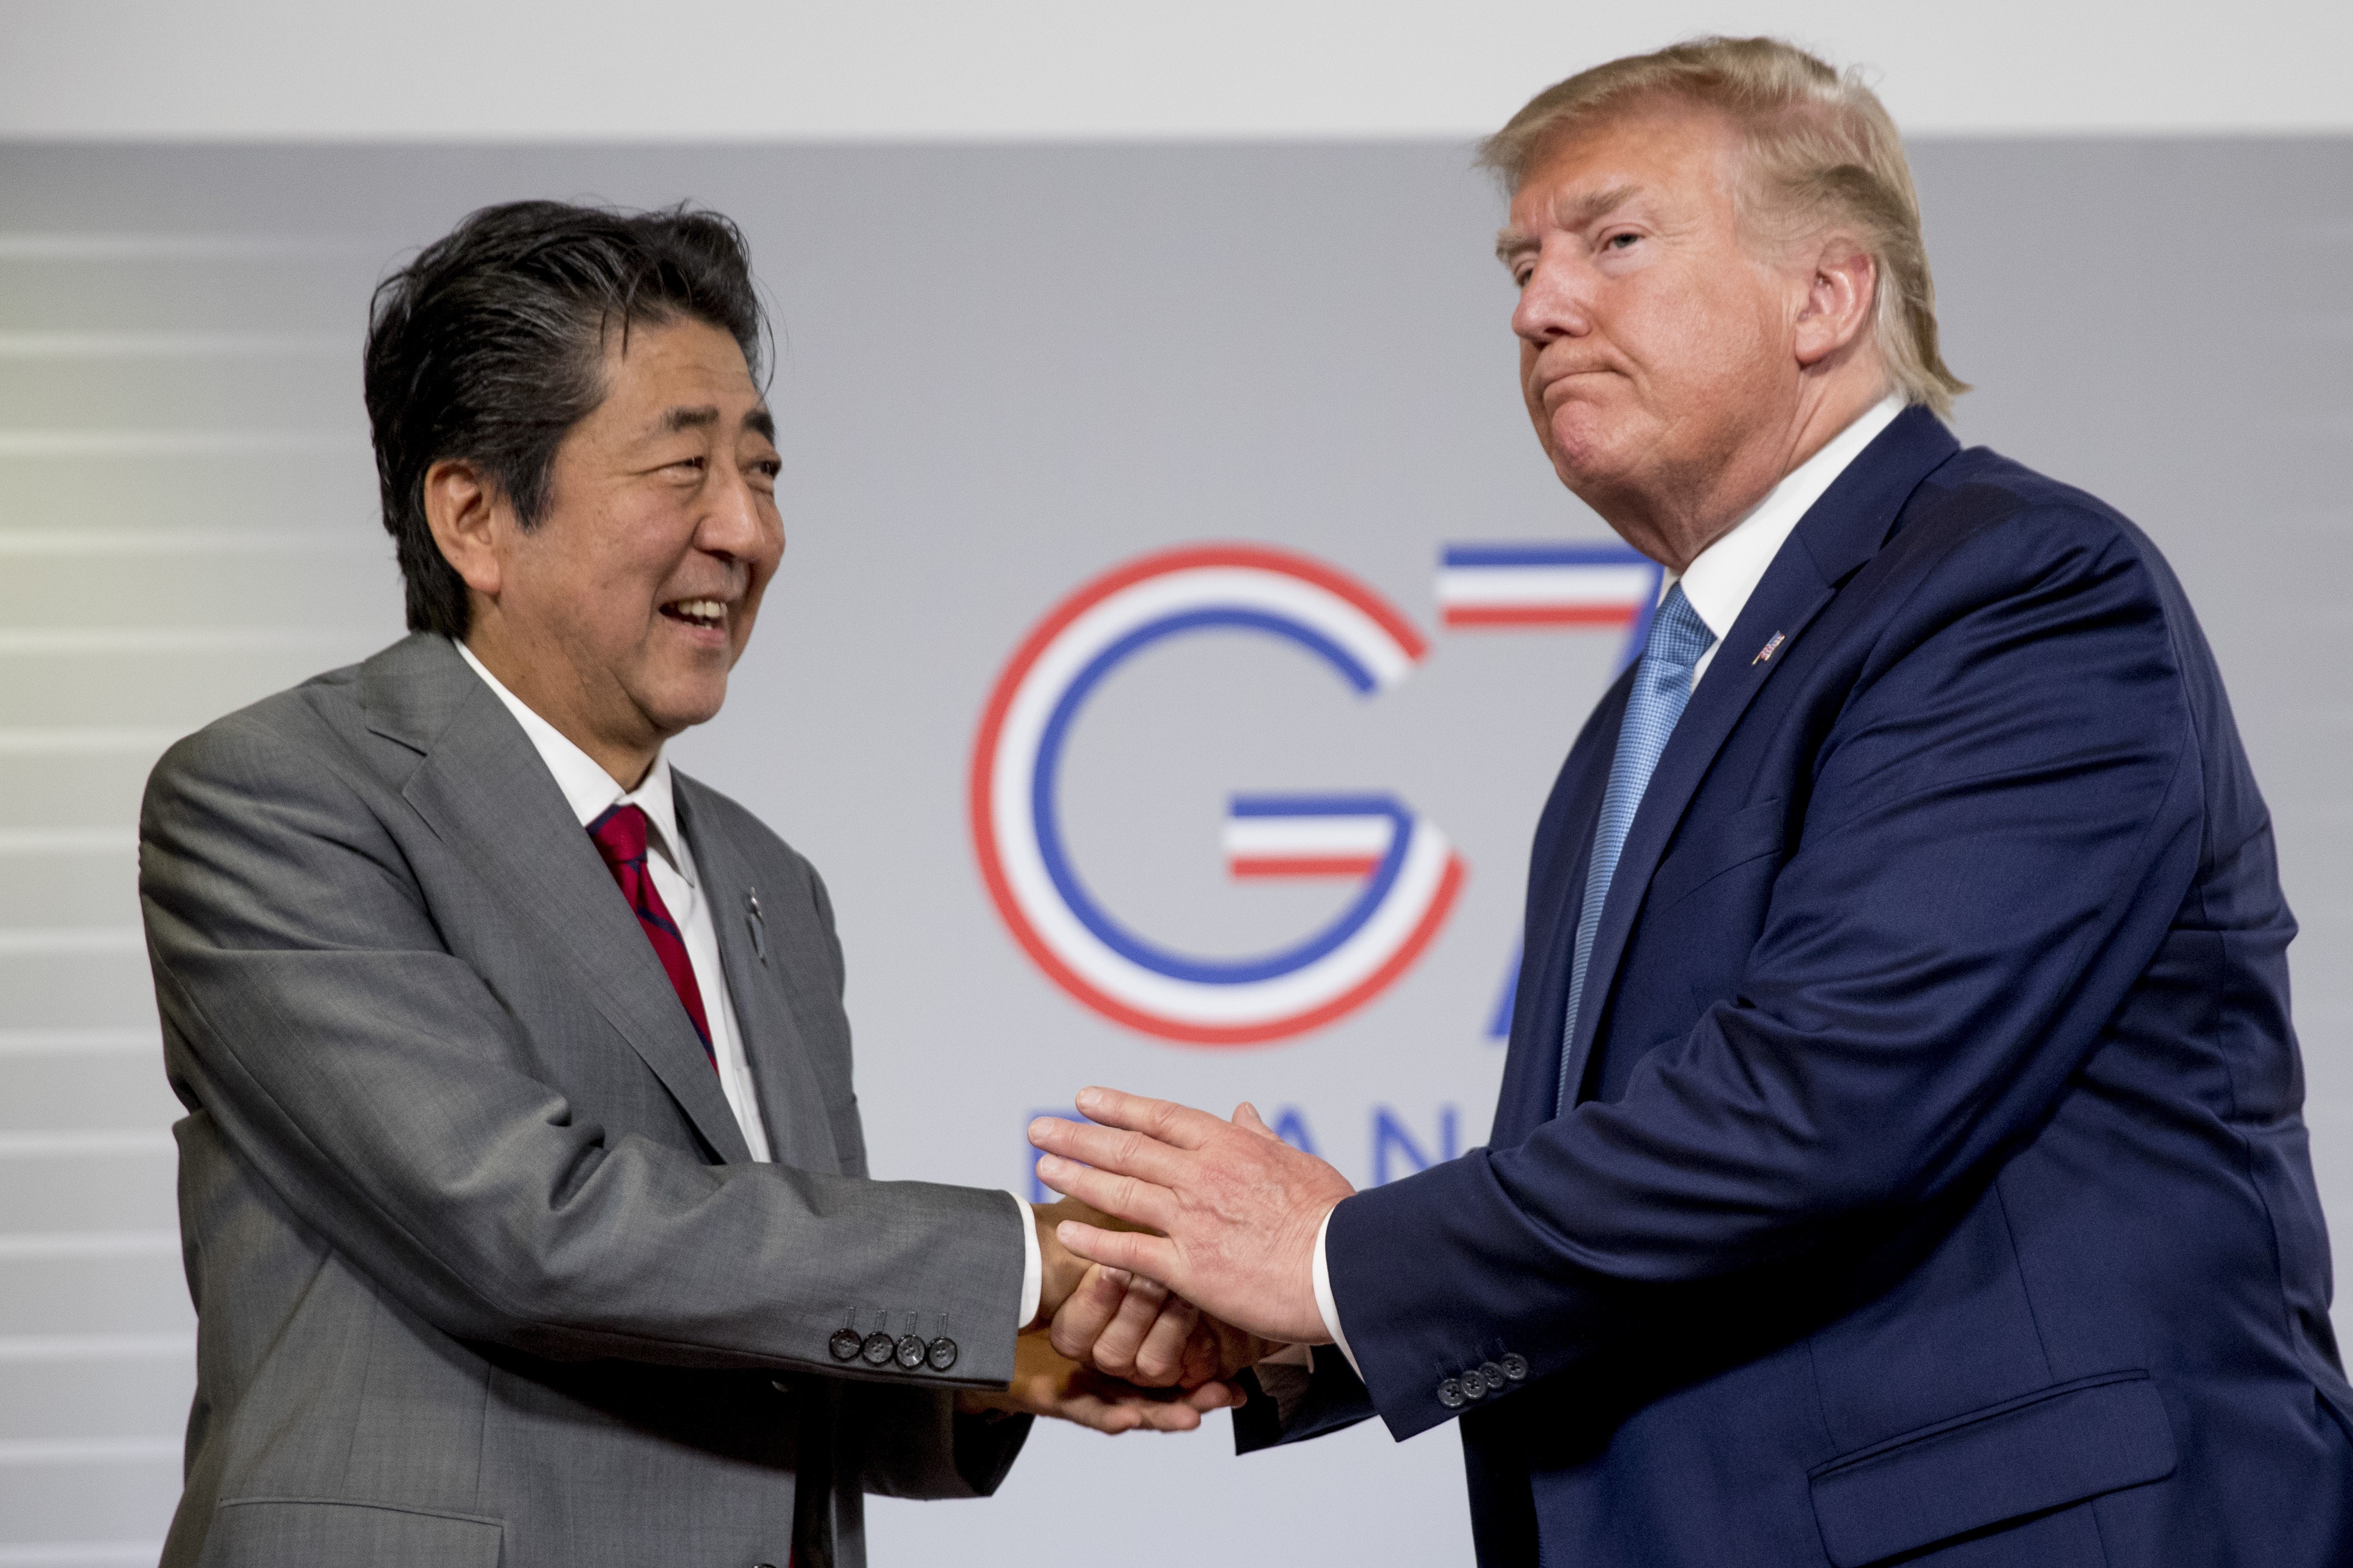 Japanese Prime Minister Shinzo Abe and US President Donald Trump last met at the G7 summit in Biarritz, France in August. Photo: AP